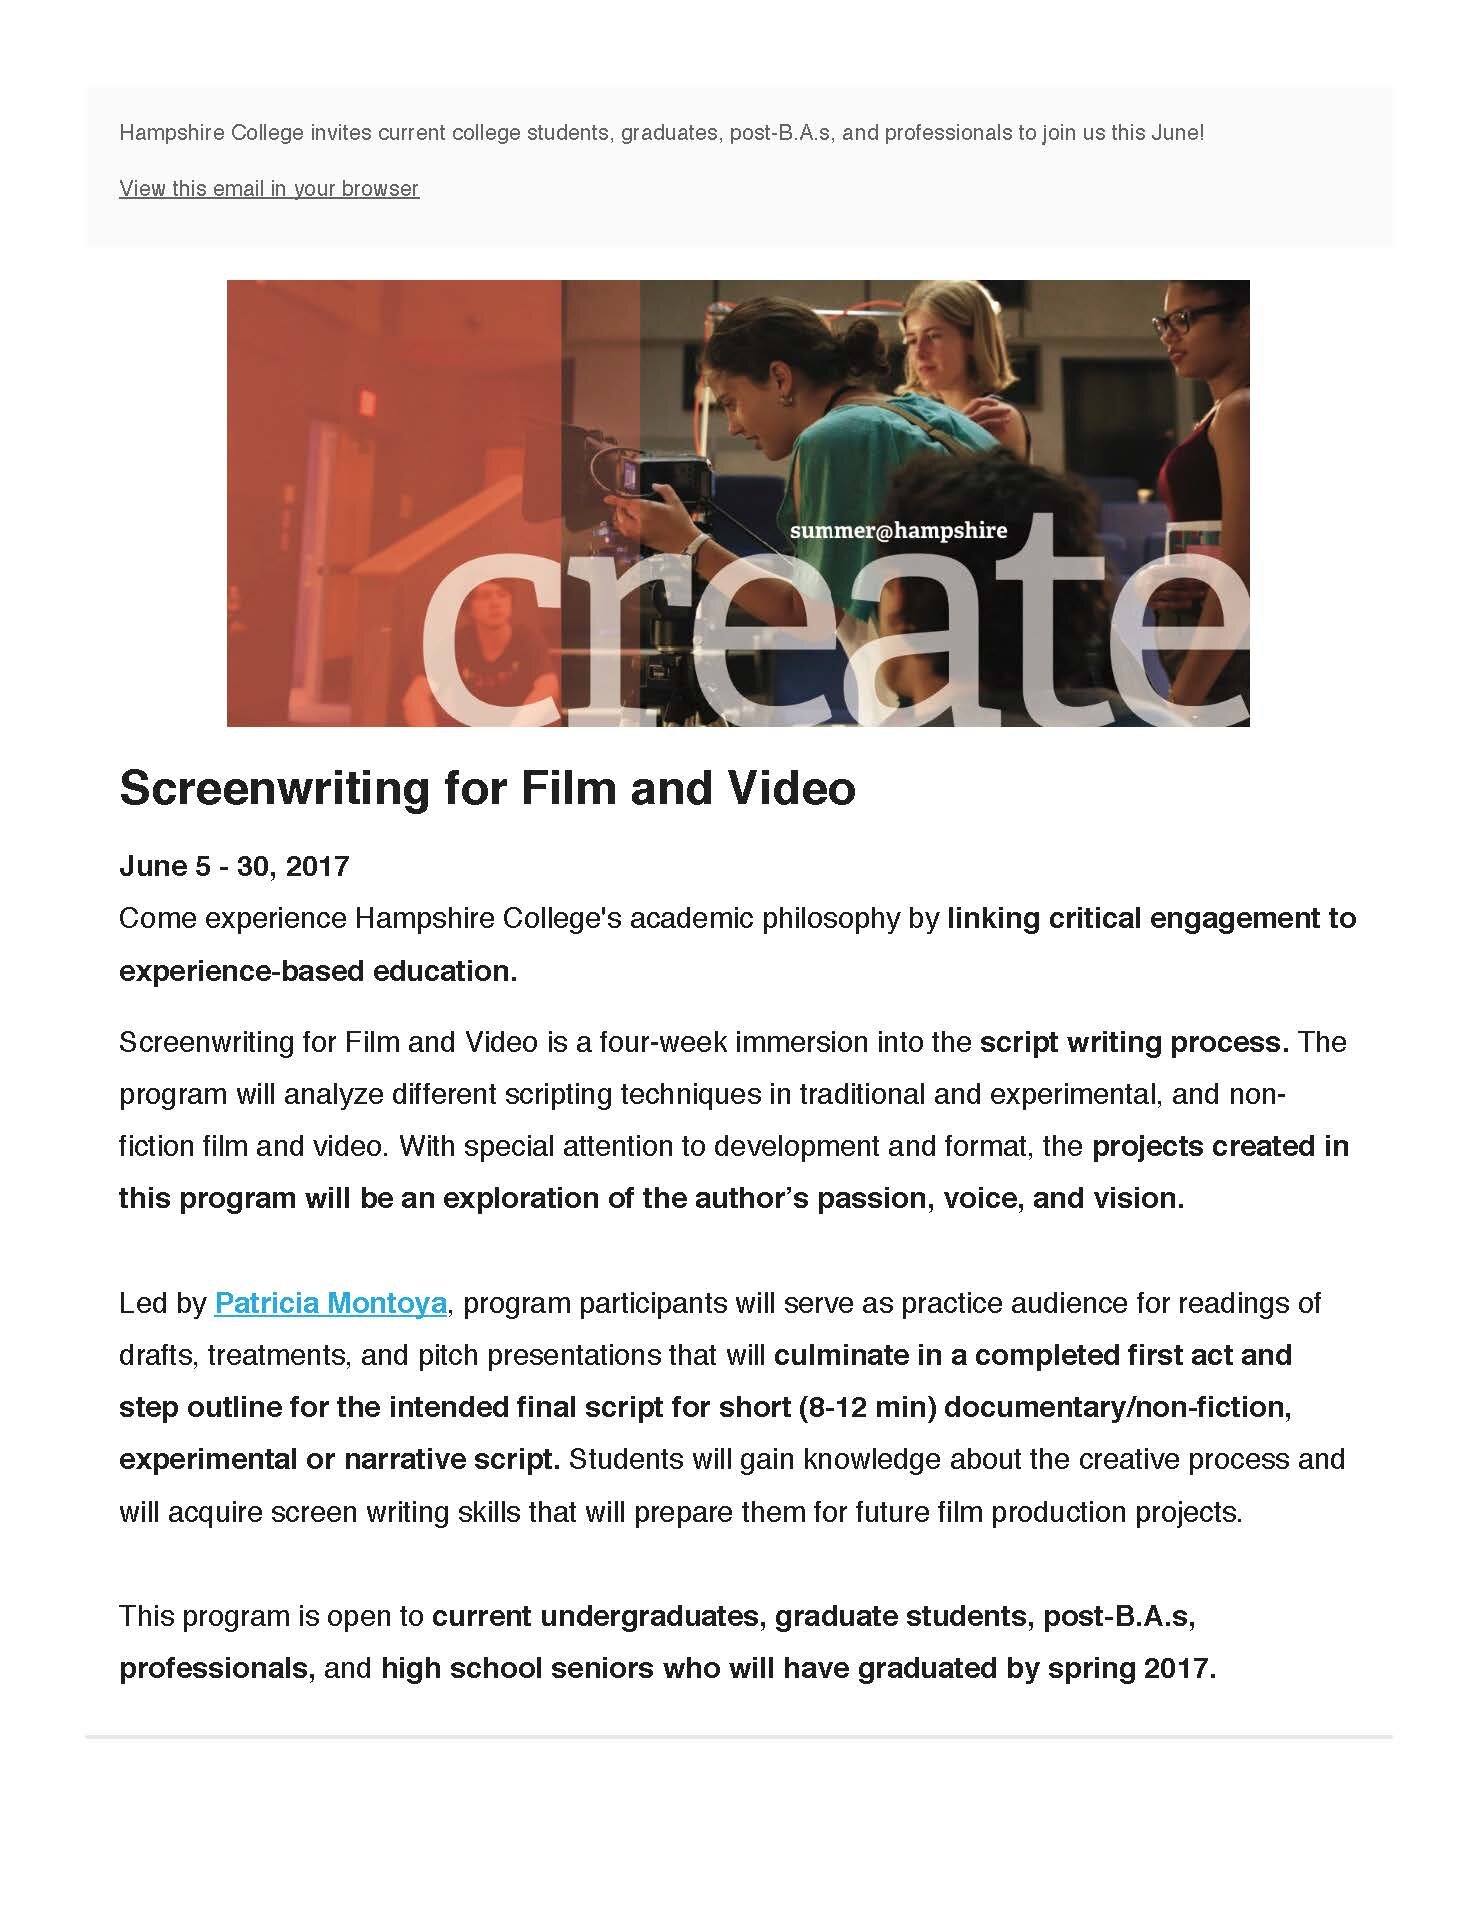 Screenwriting Email Promotion(1)_Page_1.jpg